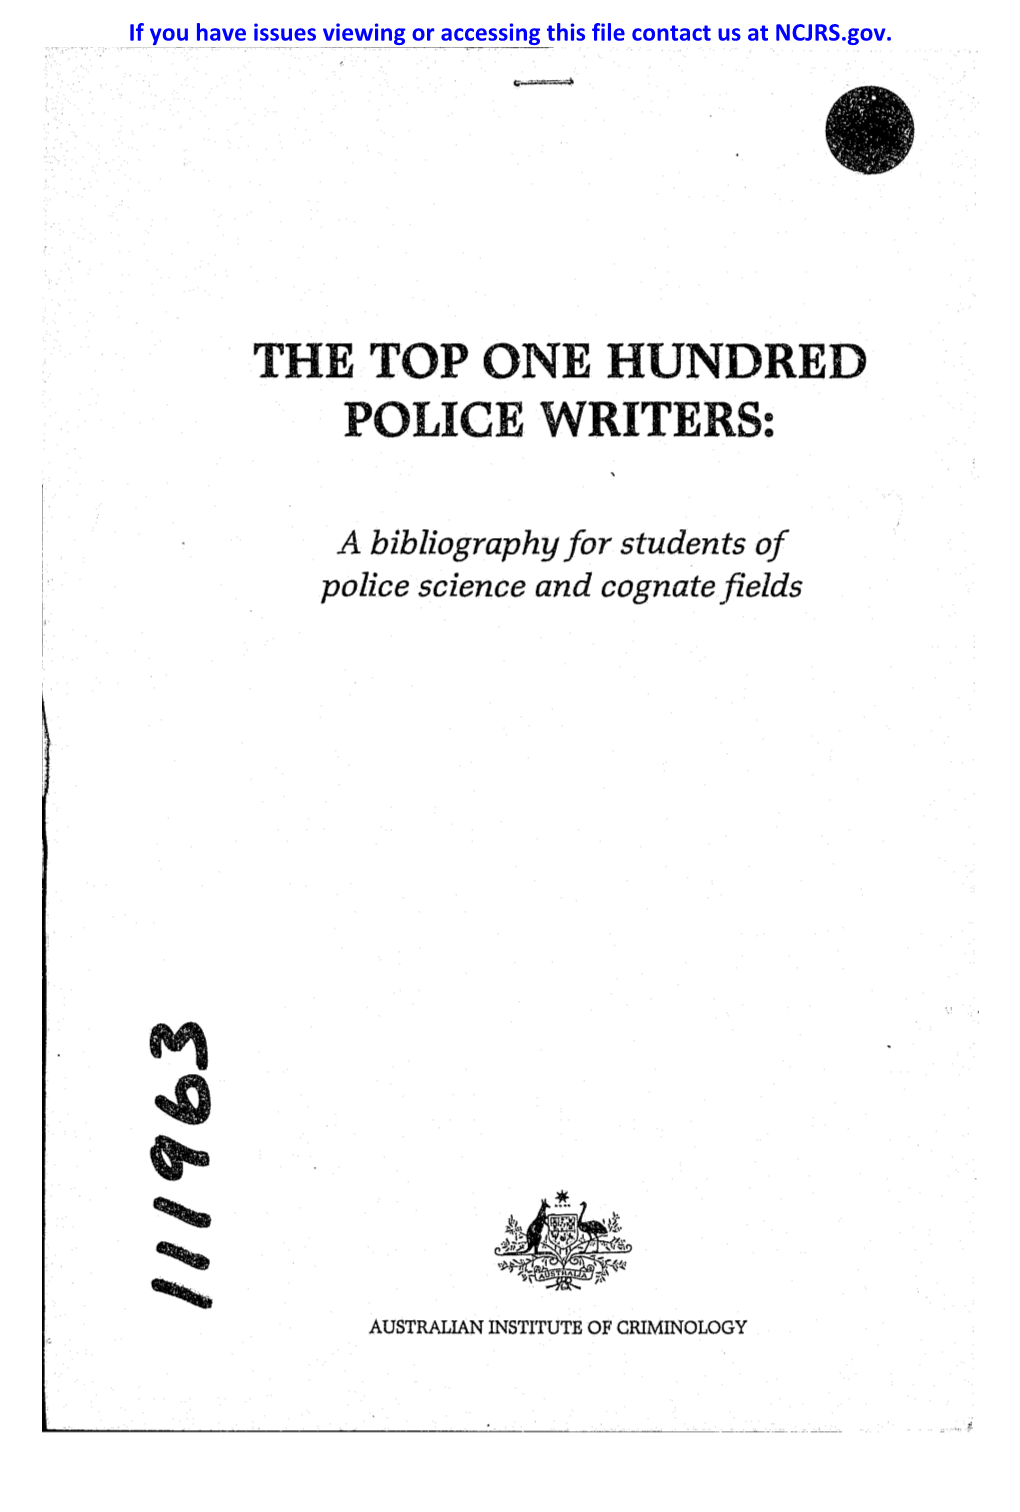 The Top One Hundred Police Writers